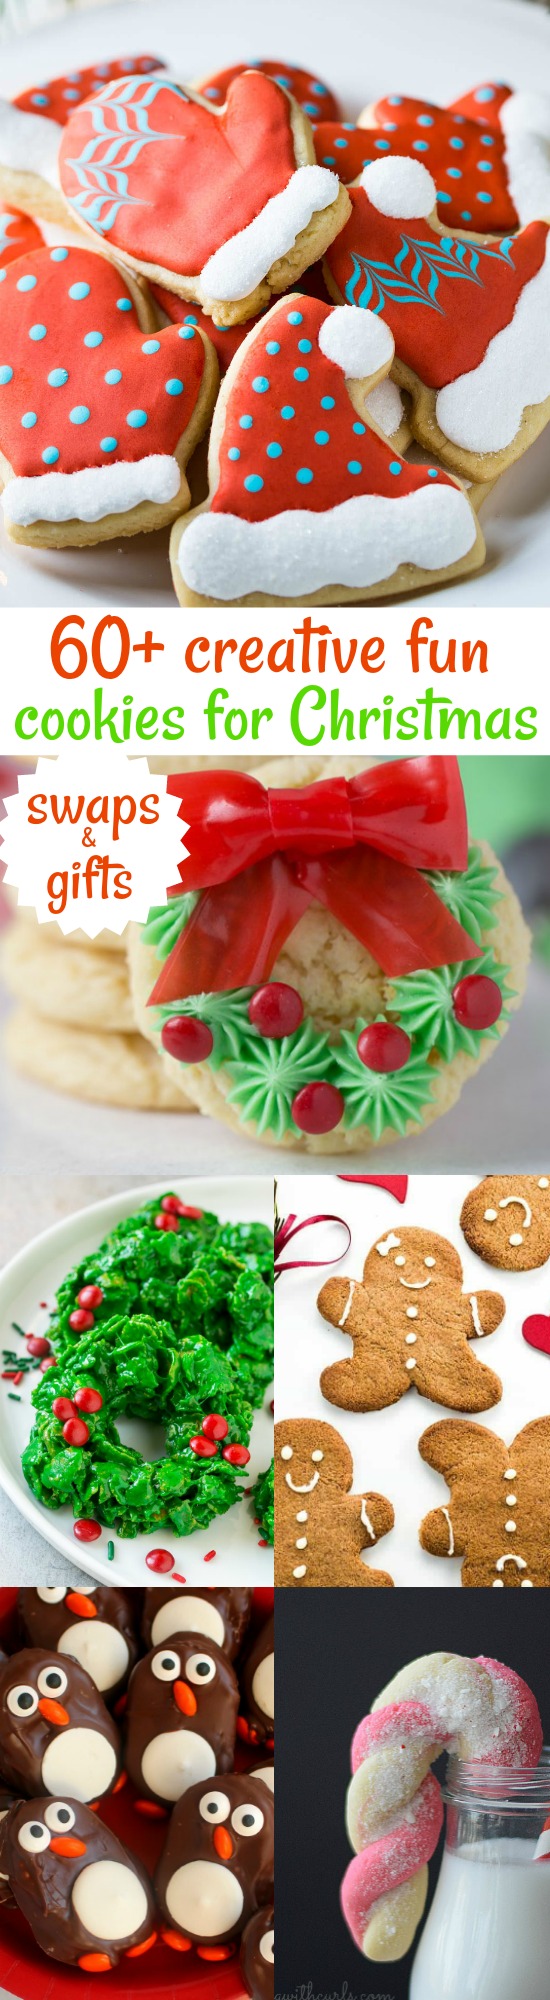 Creative Fun Cookies for Christmas Swaps and gifts